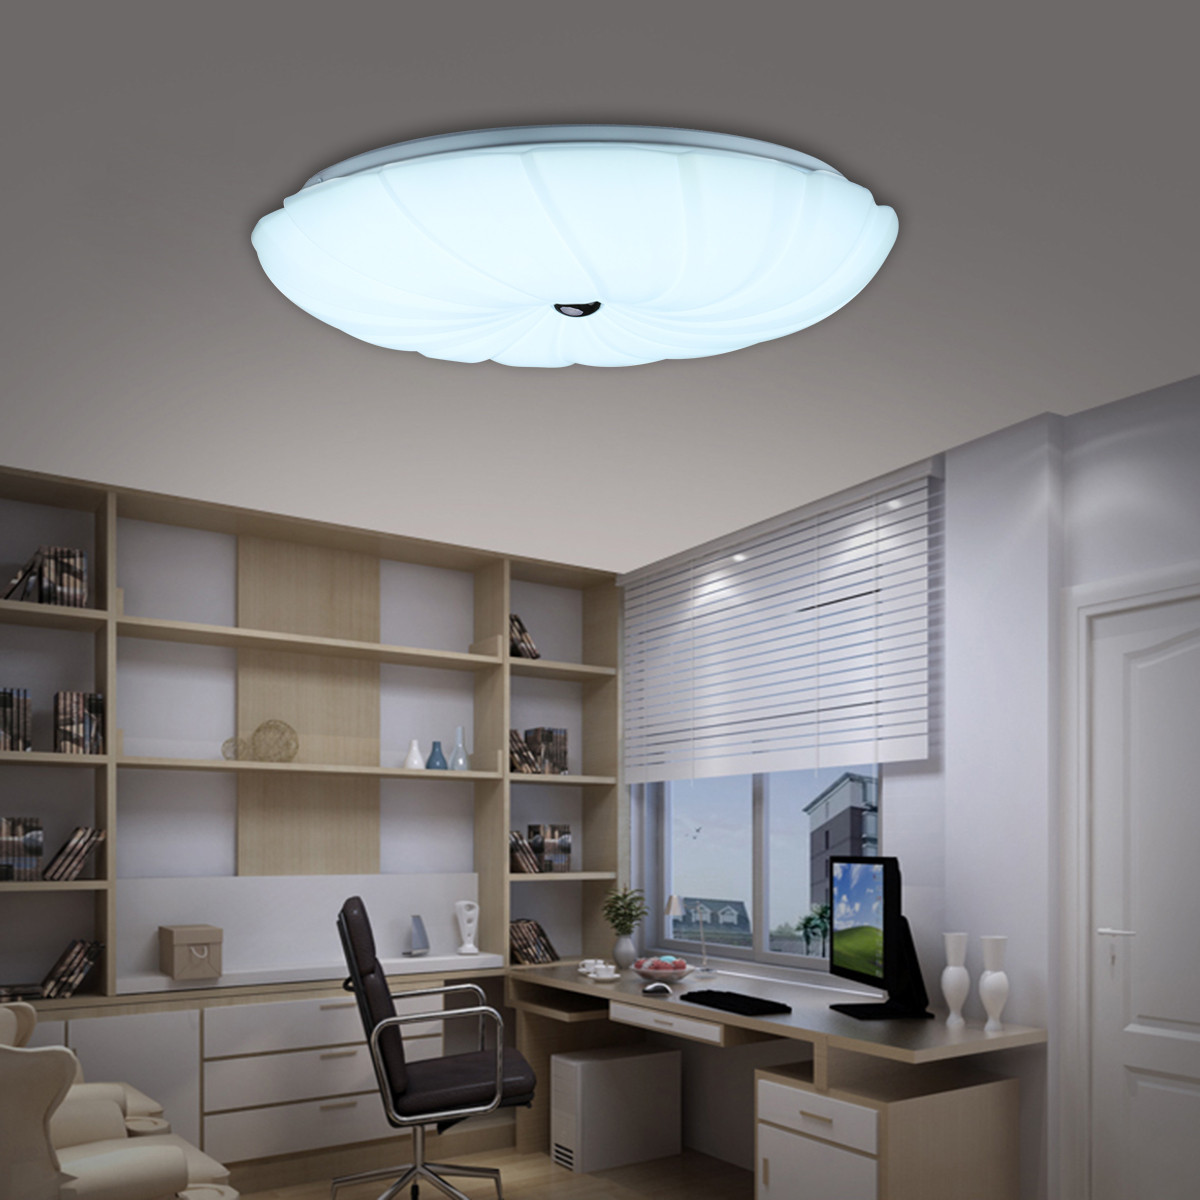 Bright Kitchen Ceiling Lights
 UK Bright 24W Round Dimmable LED Ceiling Down Light Flush